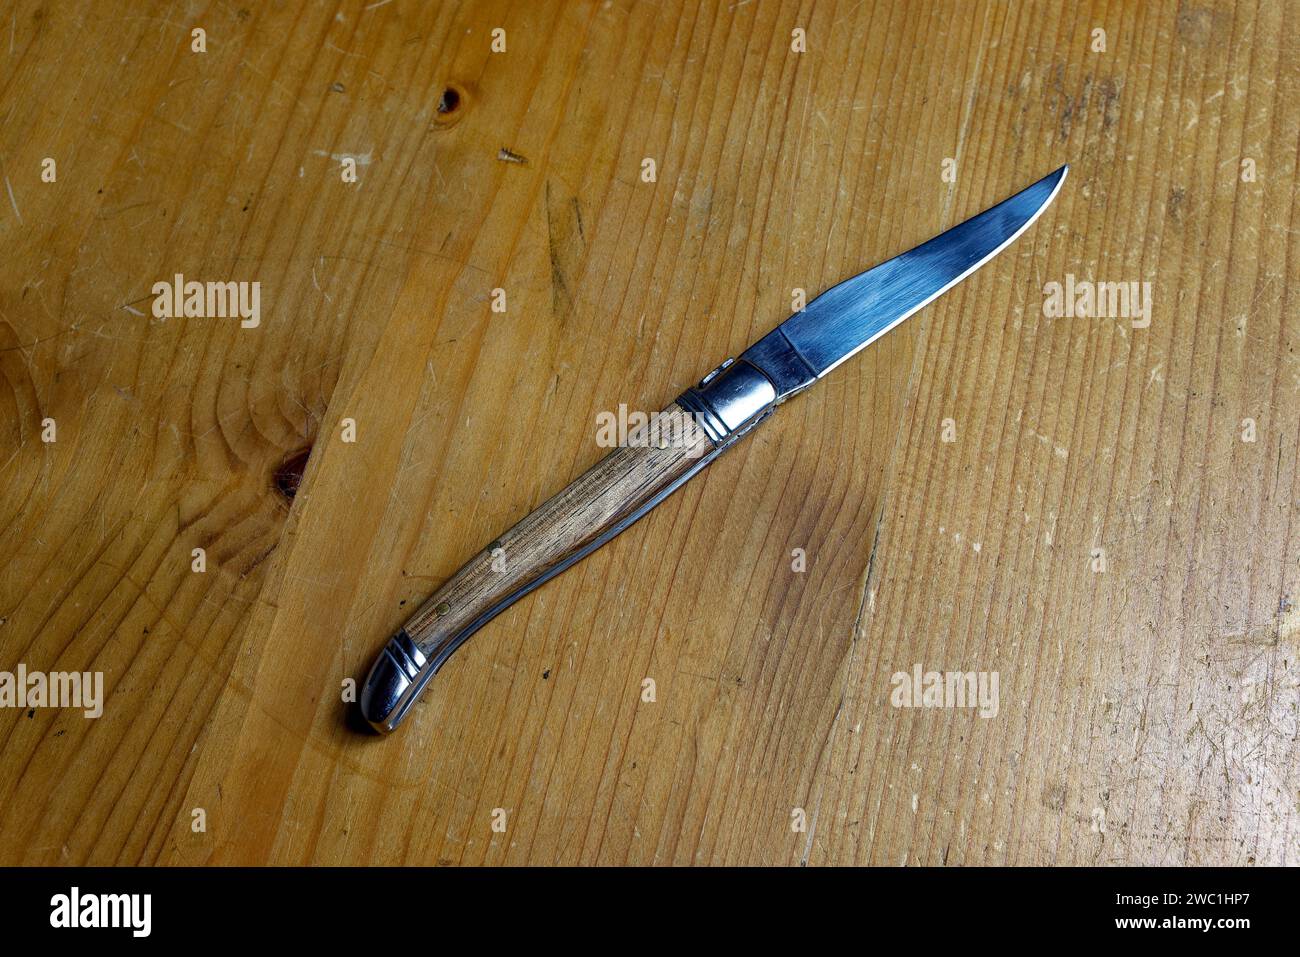 Laguiole knife opened, isolated with copyspace Stock Photo